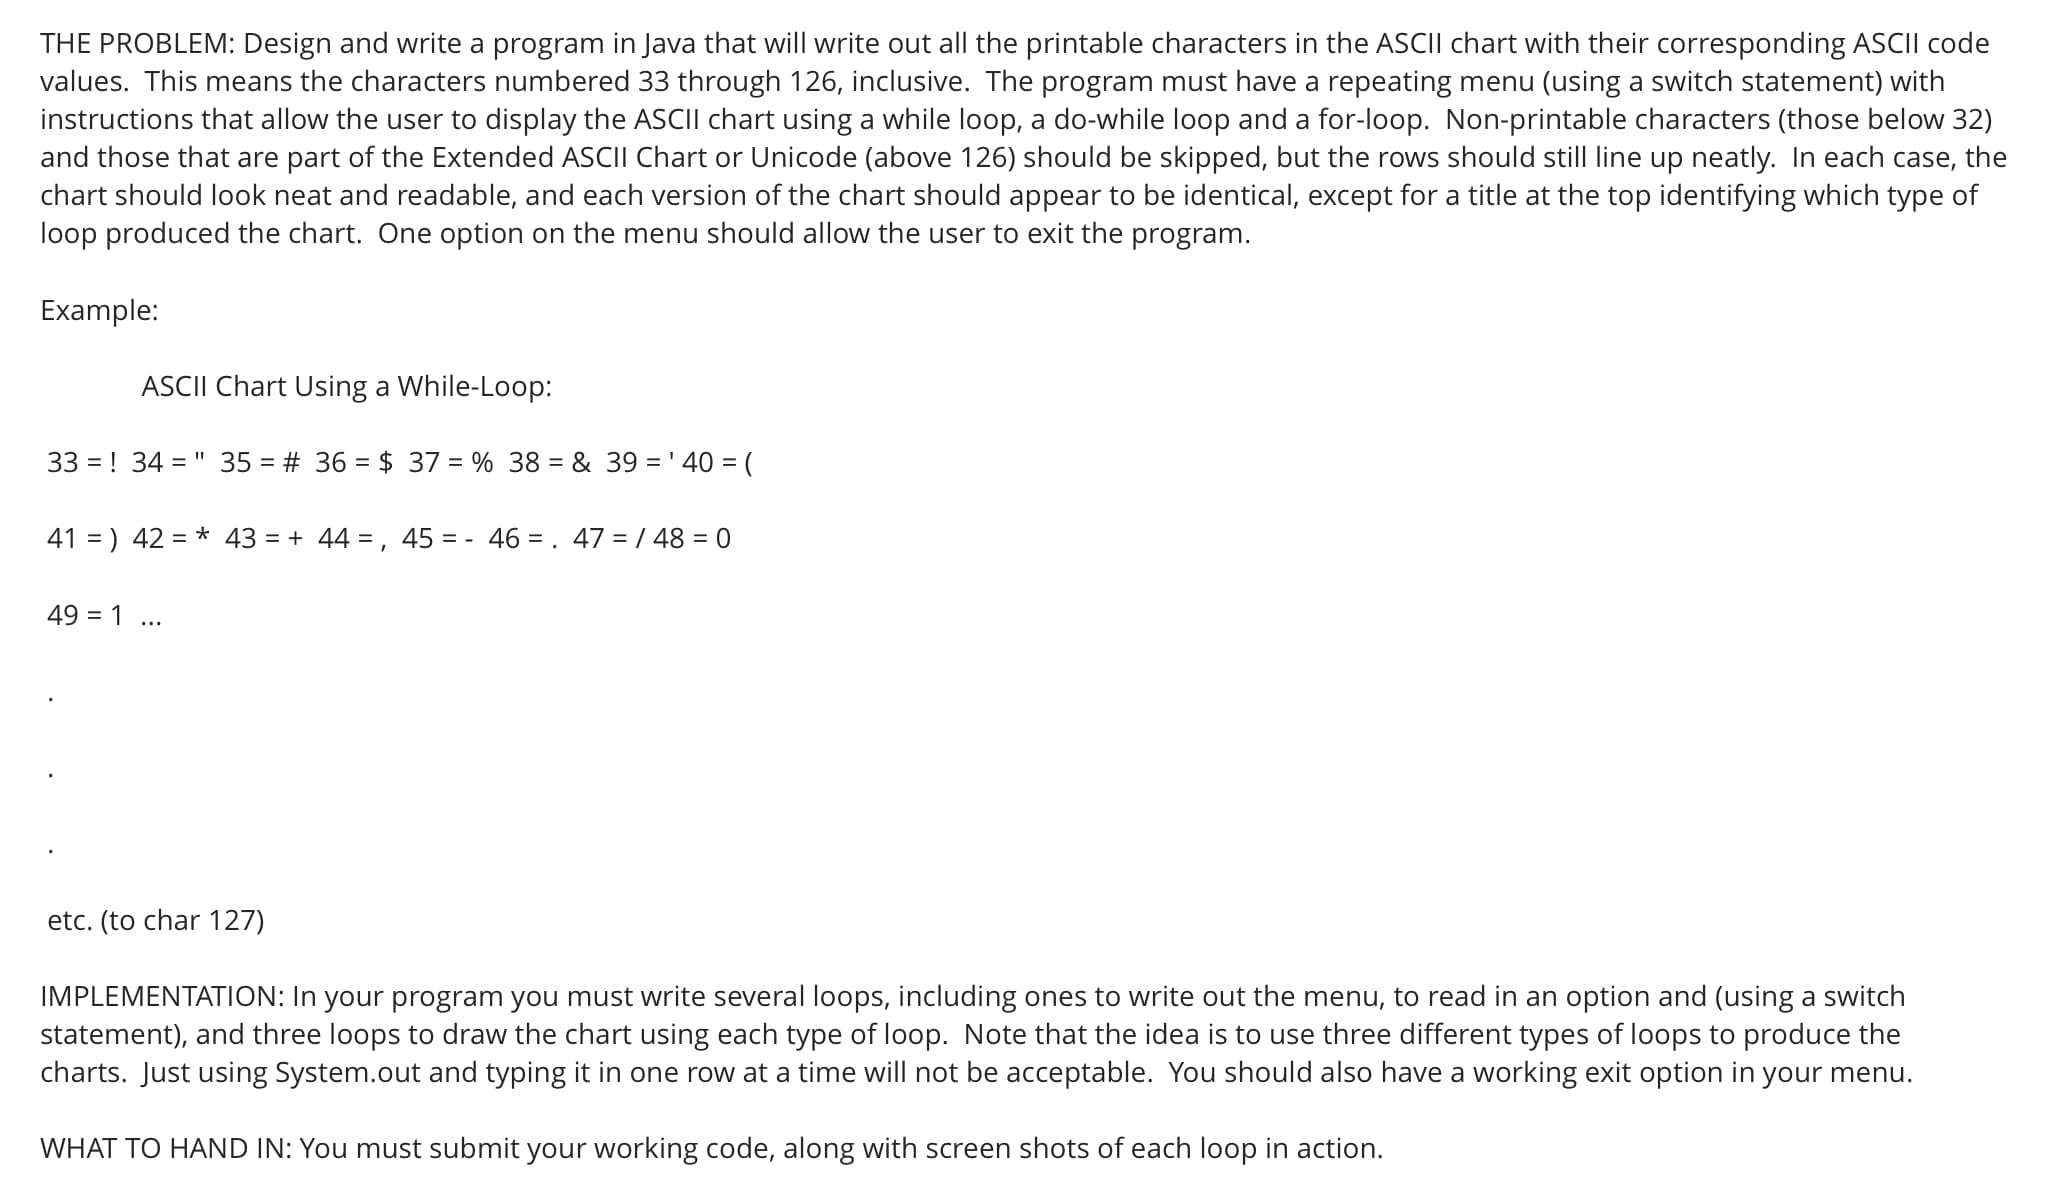 THE PROBLEM: Design and write a program in Java that will write out all the printable characters in the ASCII chart with their corresponding ASCII code
values. This means the characters numbered 33 through 126, inclusive. The program must have a repeating menu (using a switch statement) with
instructions that allow the user to display the ASCII chart using a while loop, a do-while loop and a for-loop. Non-printable characters (those below 32)
and those that are part of the Extended ASCII Chart or Unicode (above 126) should be skipped, but the rows should still line up neatly. In each case, the
chart should look neat and readable, and each version of the chart should appear to be identical, except for a title at the top identifying which type of
loop produced the chart. One option on the menu should allow the user to exit the program.
Example:
ASCII Chart Using a While-Loop:
33 = ! 34 = " 35 = # 36 = $ 37 = % 38 = & 39 = ' 40 = (
41 = ) 42 = * 43 = + 44 = , 45 = - 46 = . 47 = / 48 = 0
49 = 1 ...
etc. (to char 127)
IMPLEMENTATION: In your program you must write several loops, including ones to write out the menu, to read in an option and (using a switch
statement), and three loops to draw the chart using each type of loop. Note that the idea is to use three different types of loops to produce the
charts. Just using System.out and typing it in one row at a time will not be acceptable. You should also have a working exit option in your menu.
WHAT TO HAND IN: You must submit your working code, along with screen shots of each loop in action.
